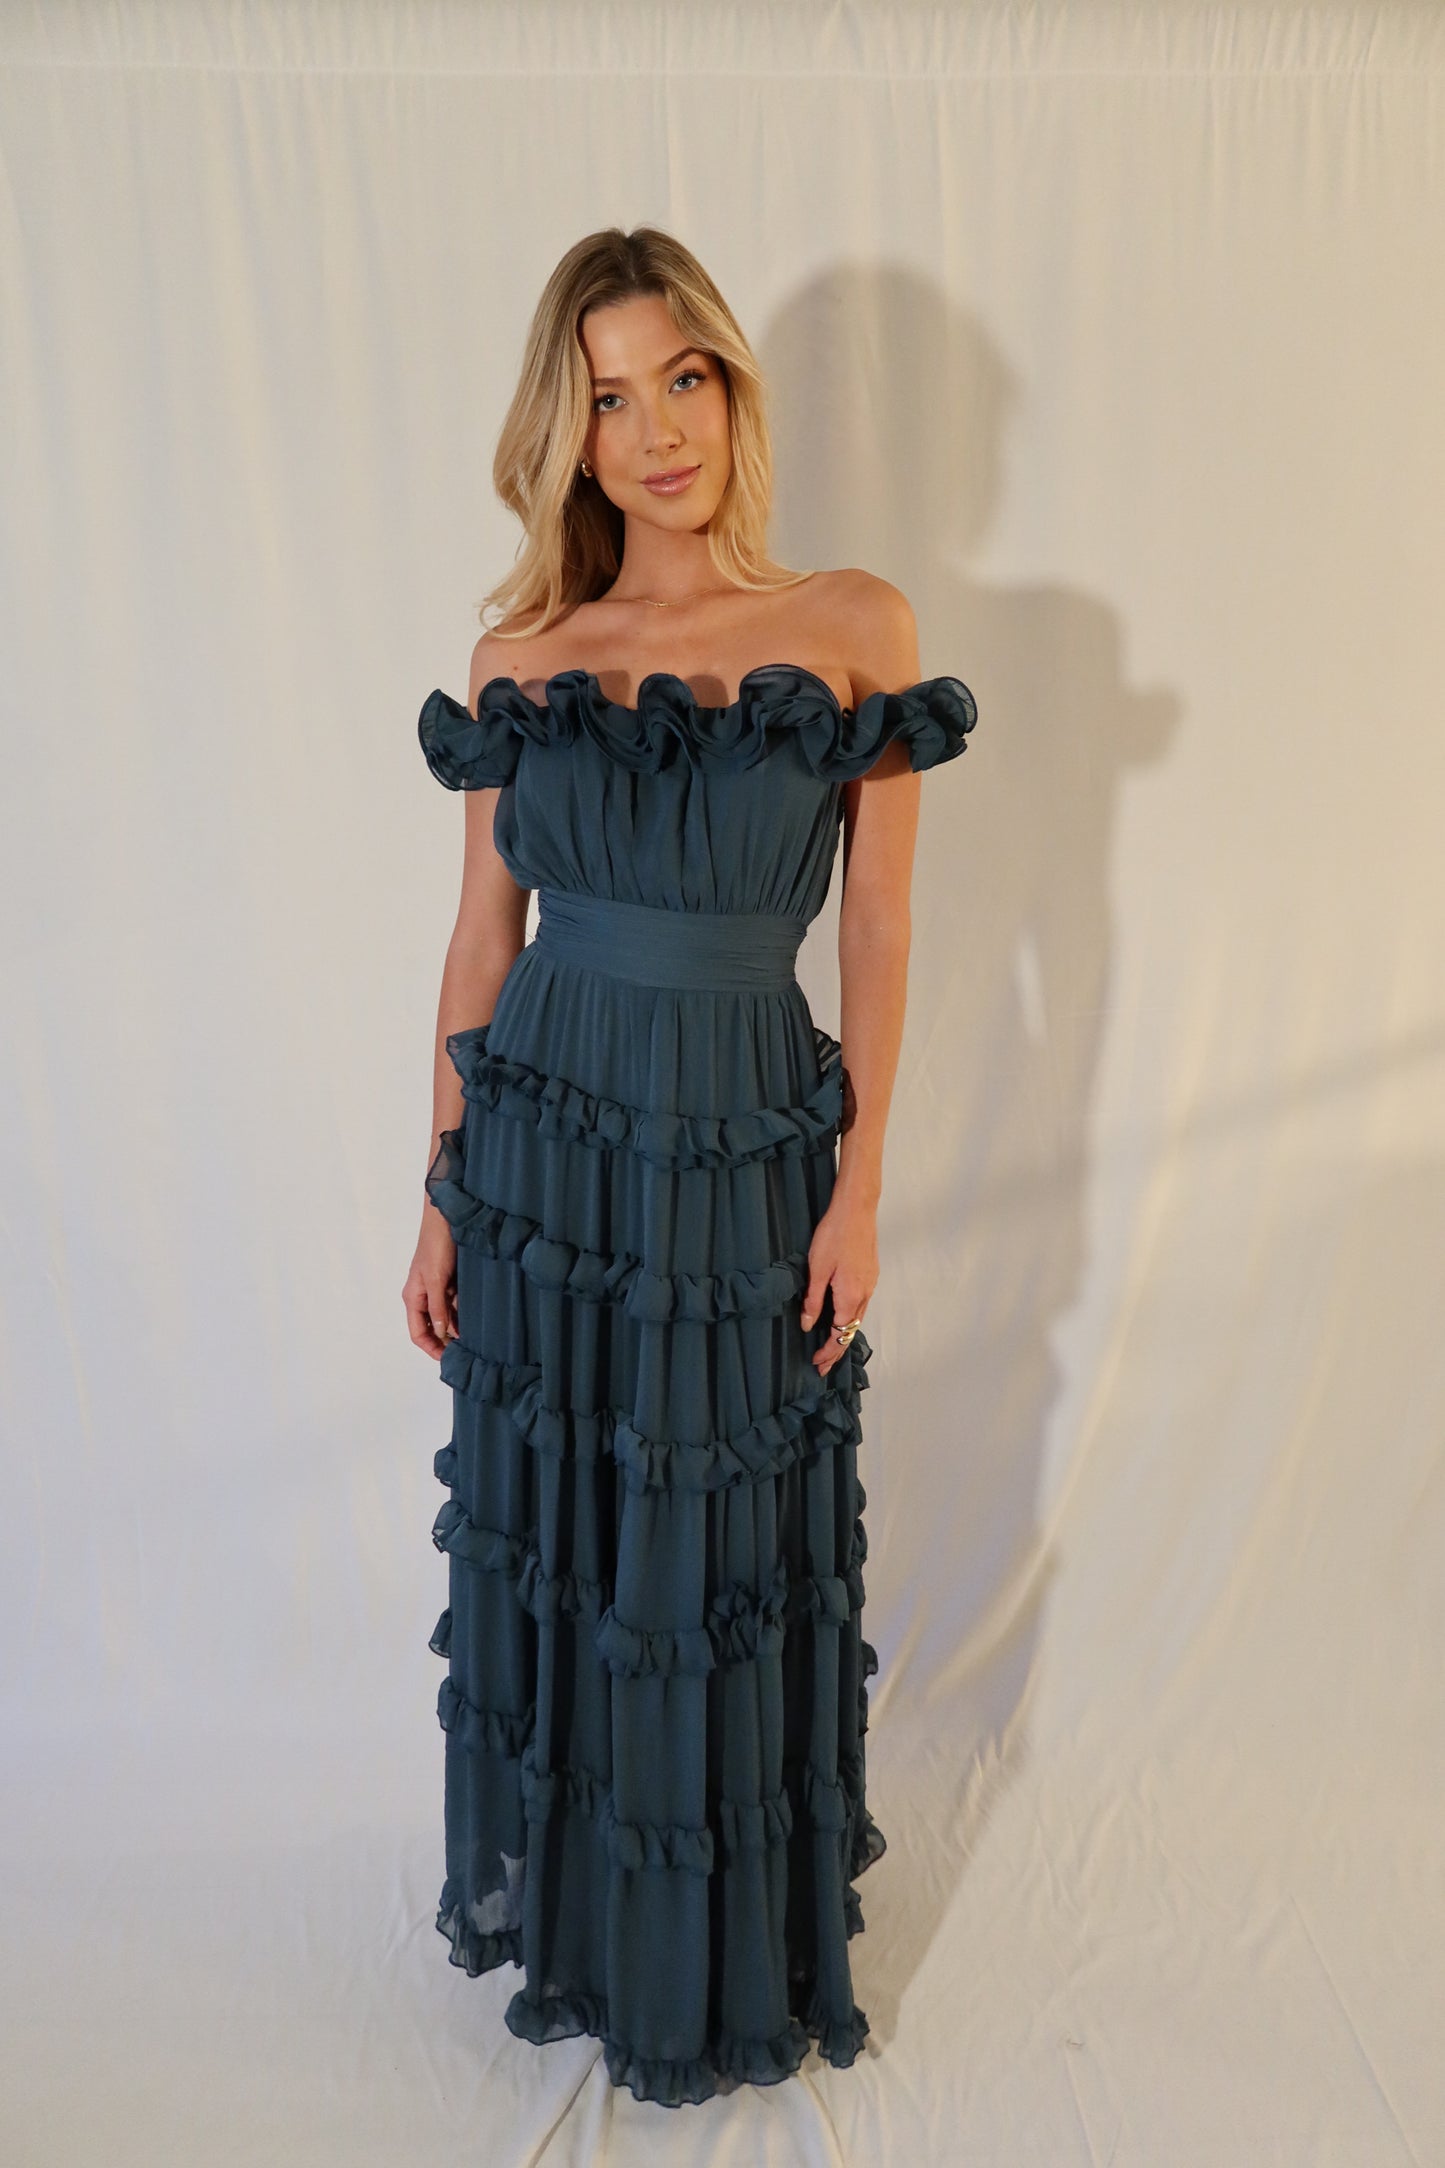 LUNA TURQUOISE GOWN